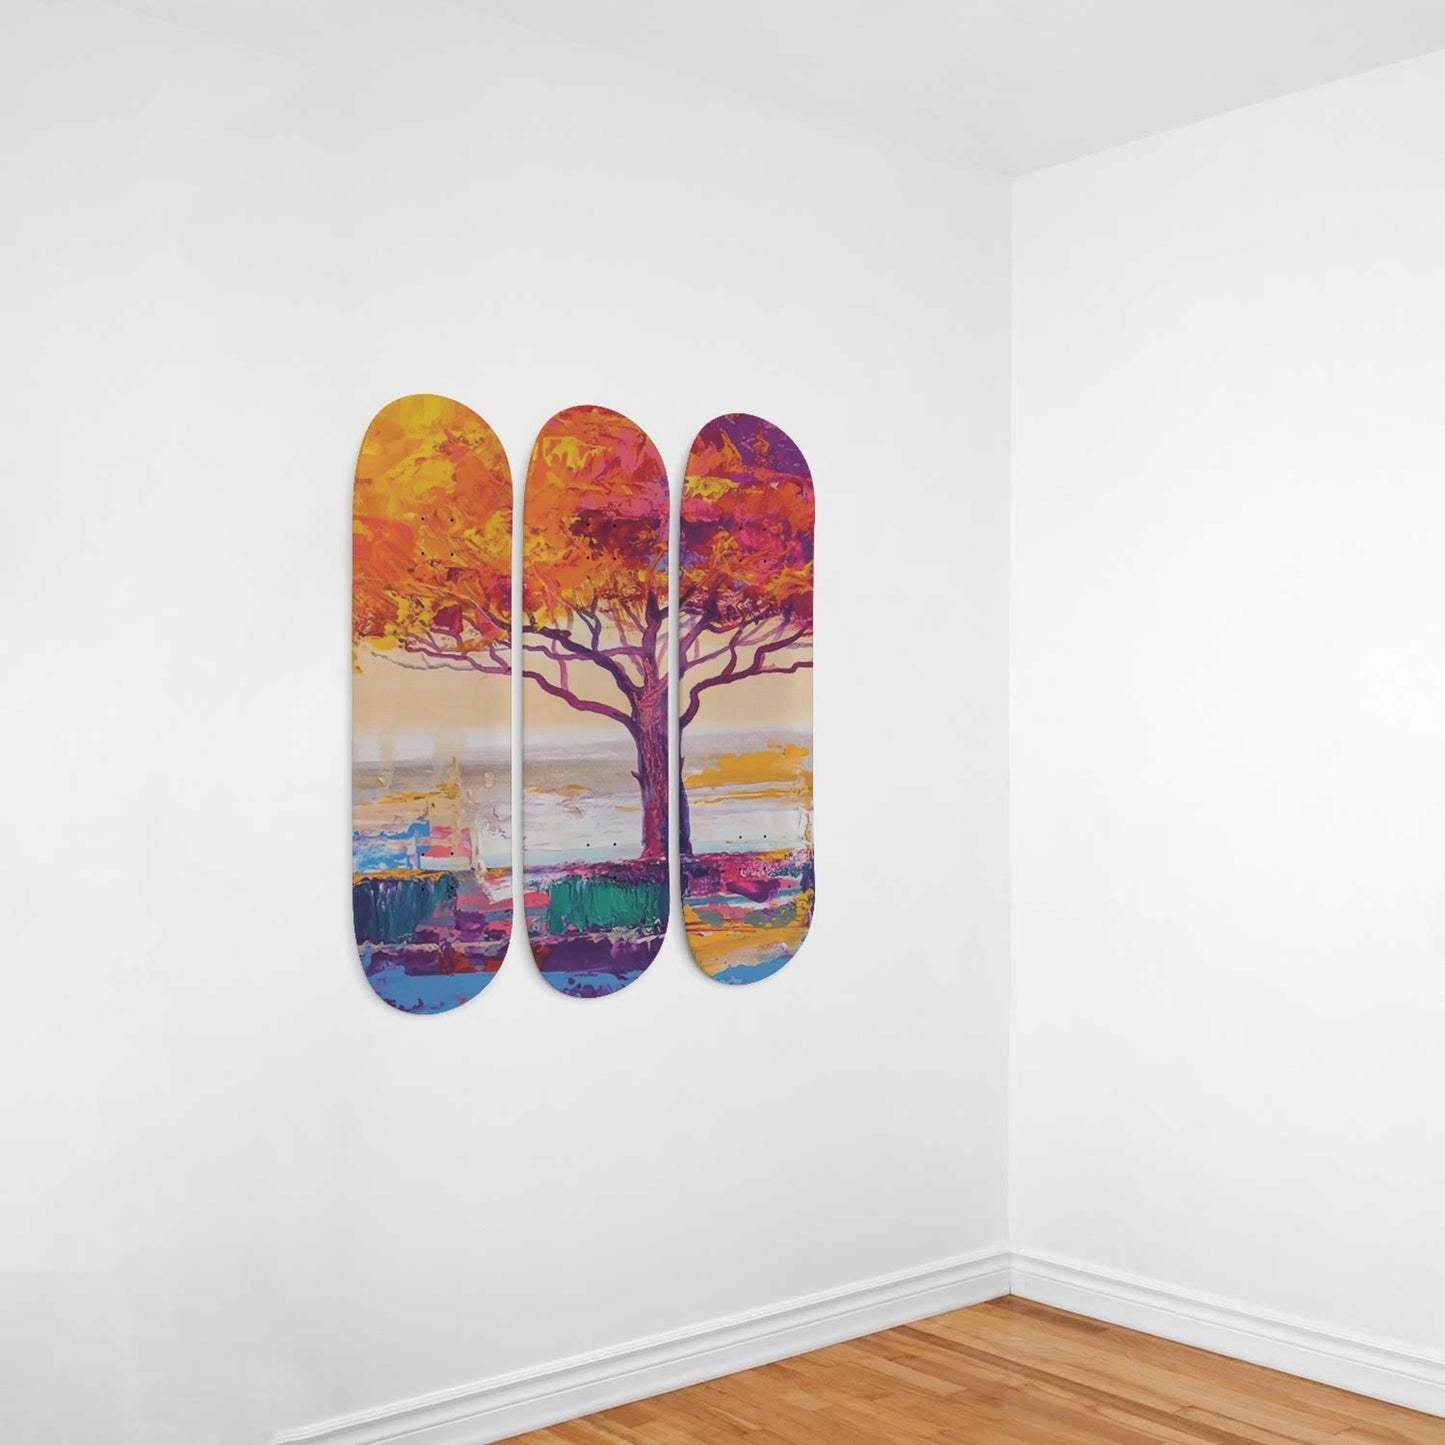 Random Colorful Artwork 12 | Skateboard Deck Wall Art, Wall Hanged Room Decoration, Maple Wood, Accent Gift for Home, Aesthetic Wall Art